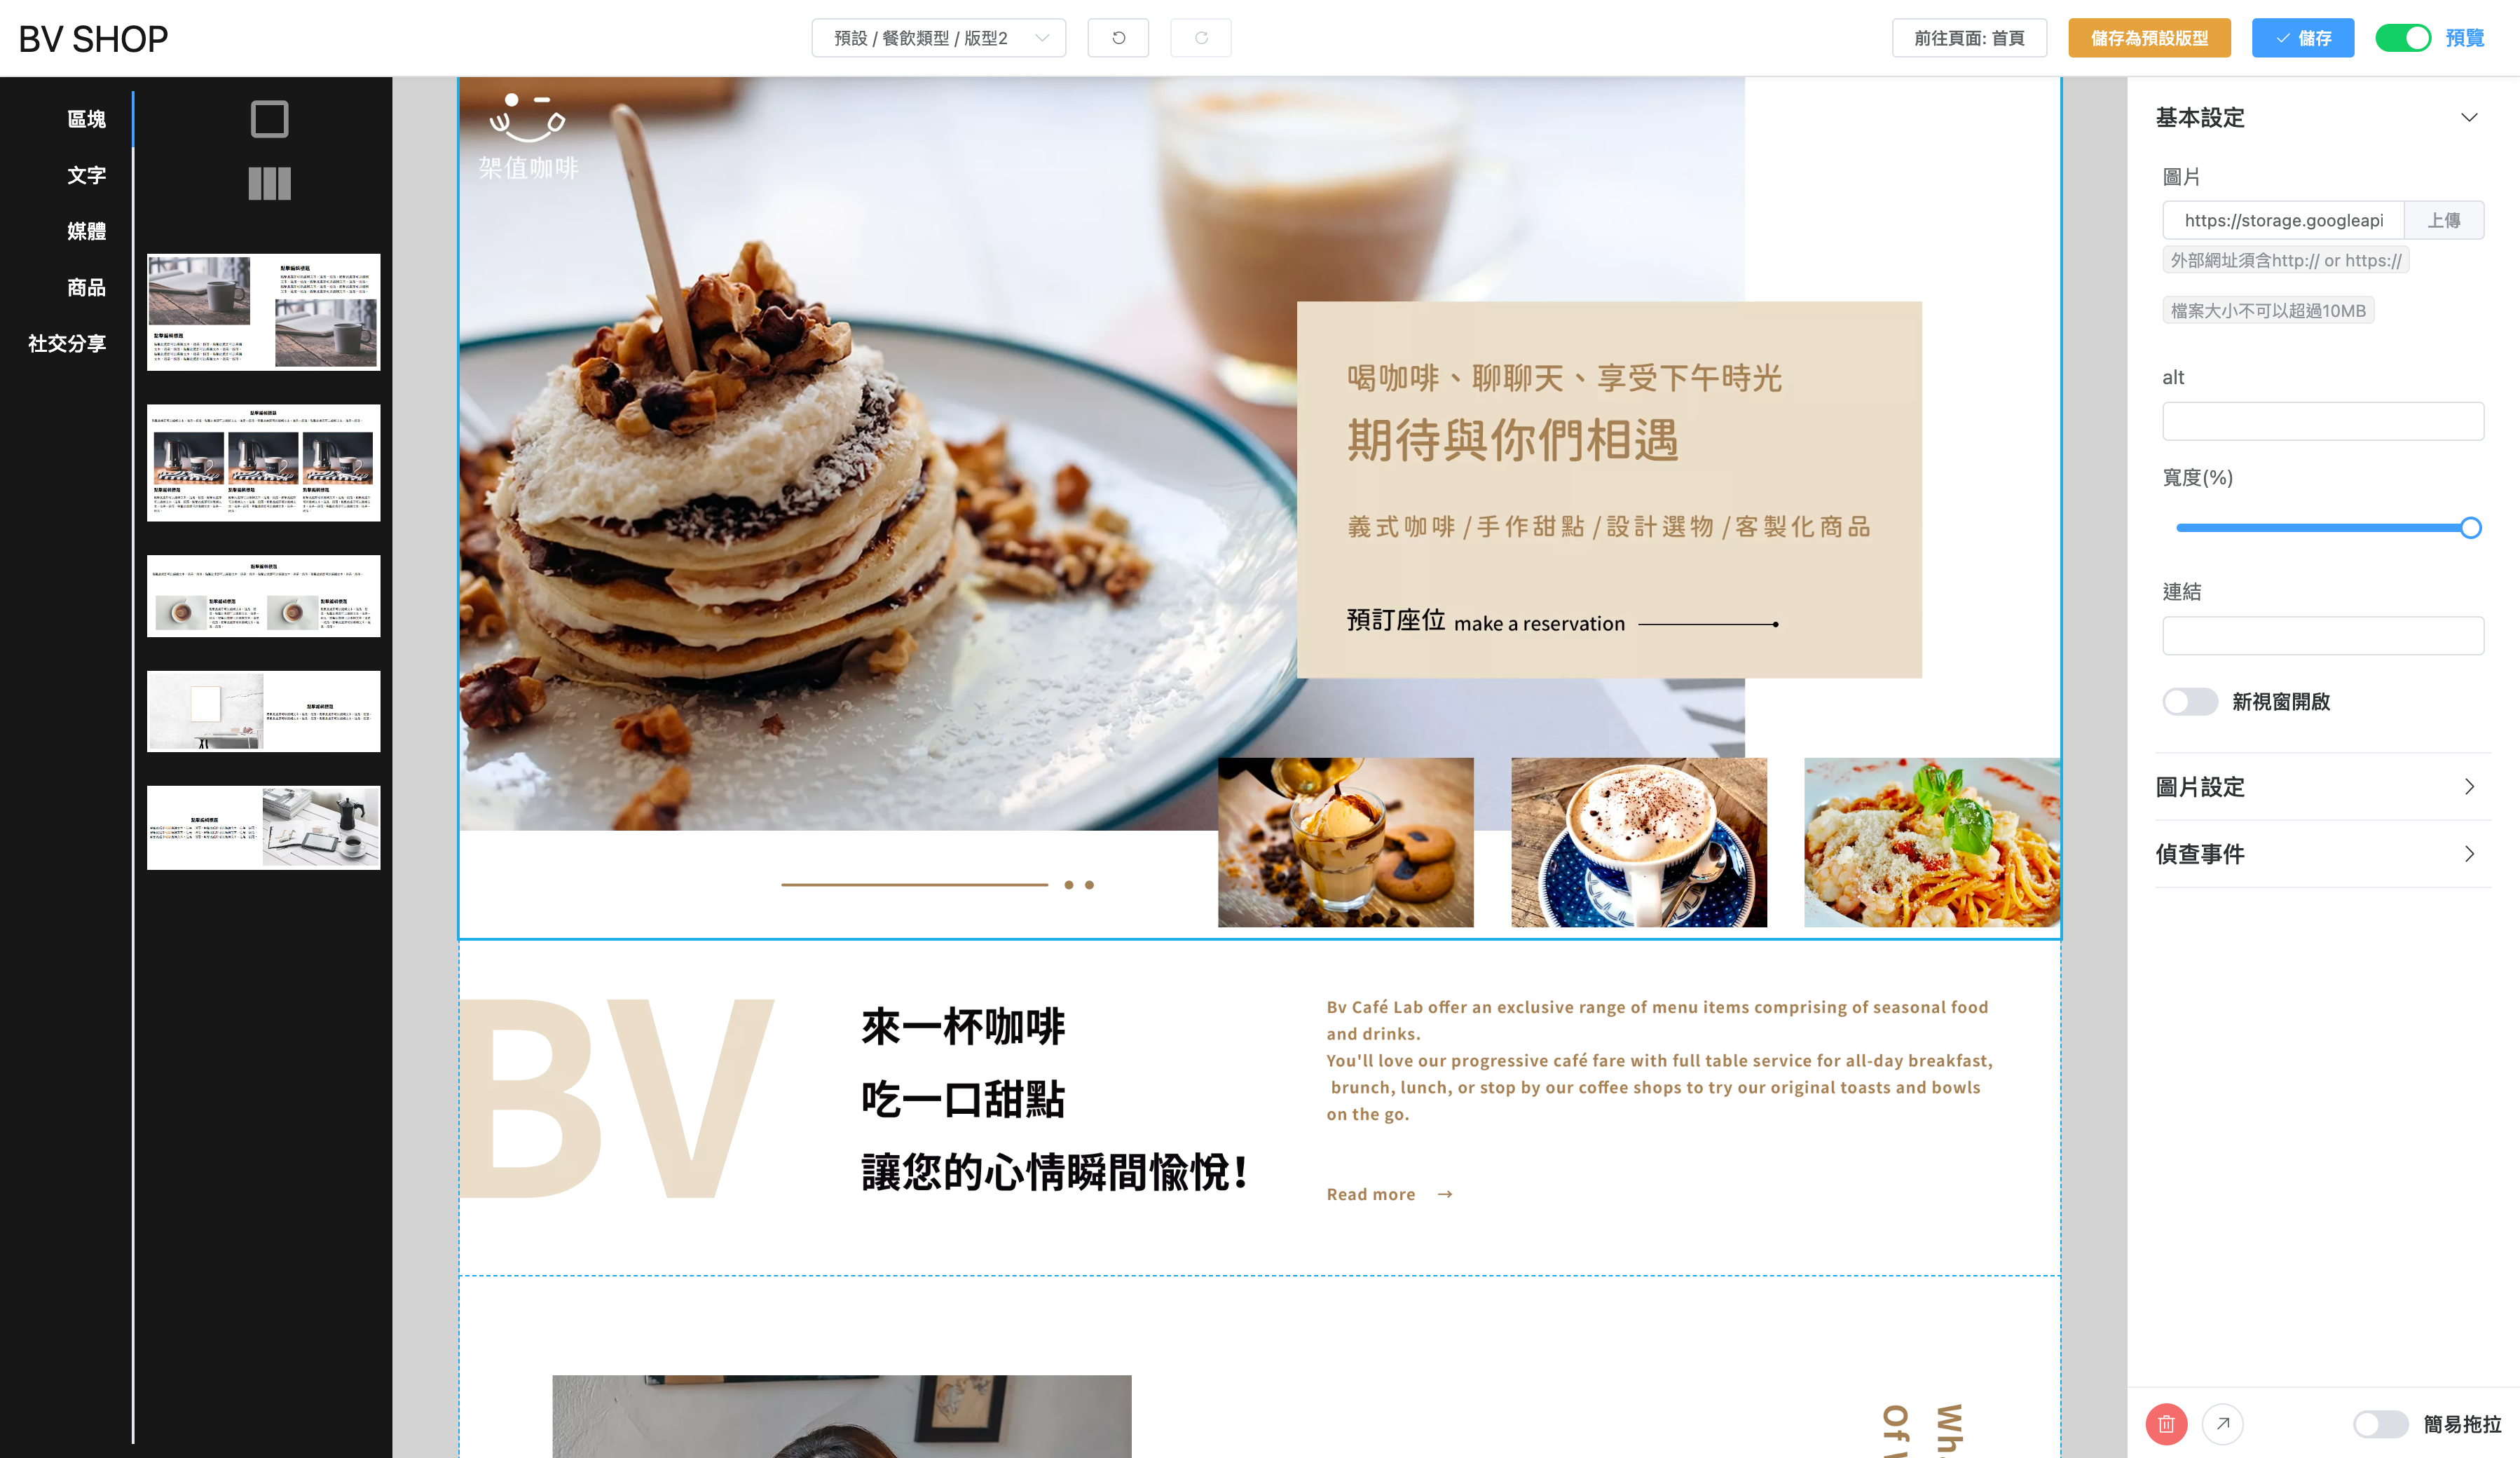 s10319j.bvshop.tw_home_edit_token=5a5b24d56772022678acccd4e3377cb8&id=71&page=%2F拷貝2.png